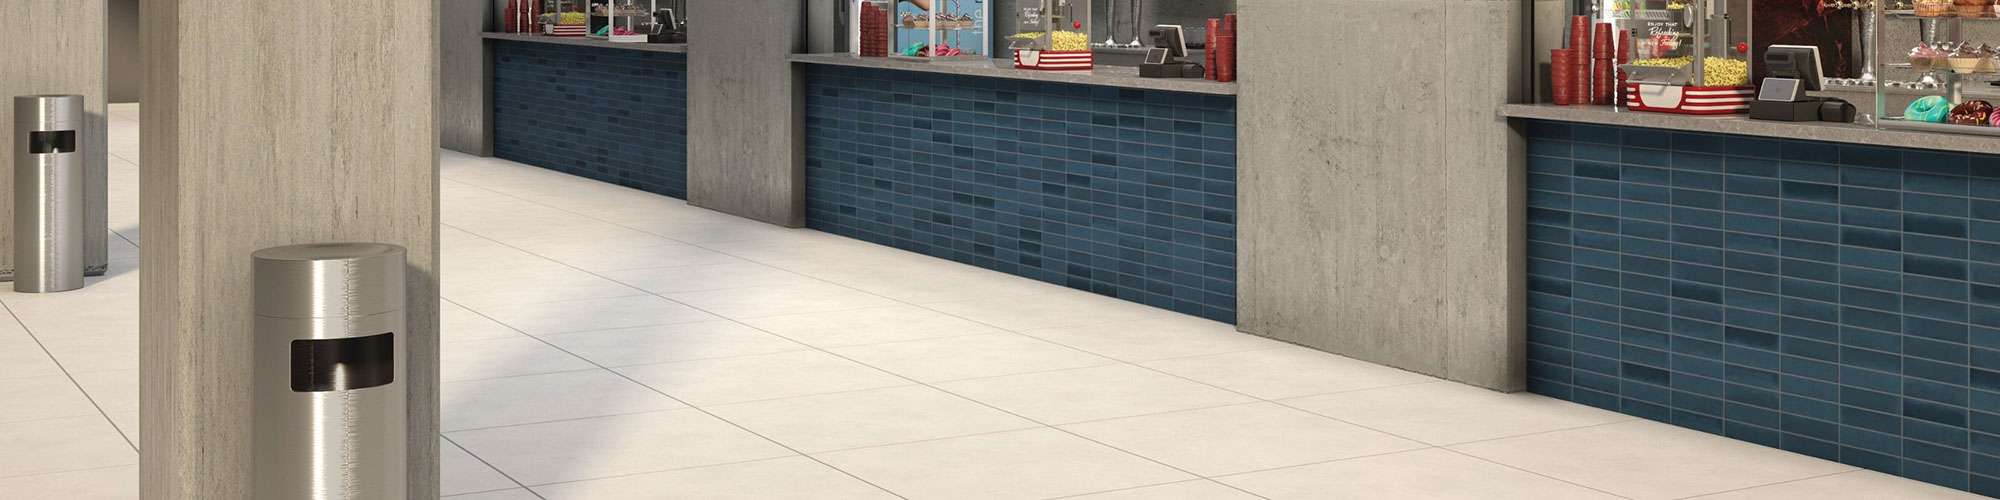 Baseball stadium concession stands with gray quartz countertops, blue subway wall tile, beige floor tile that looks like concrete.